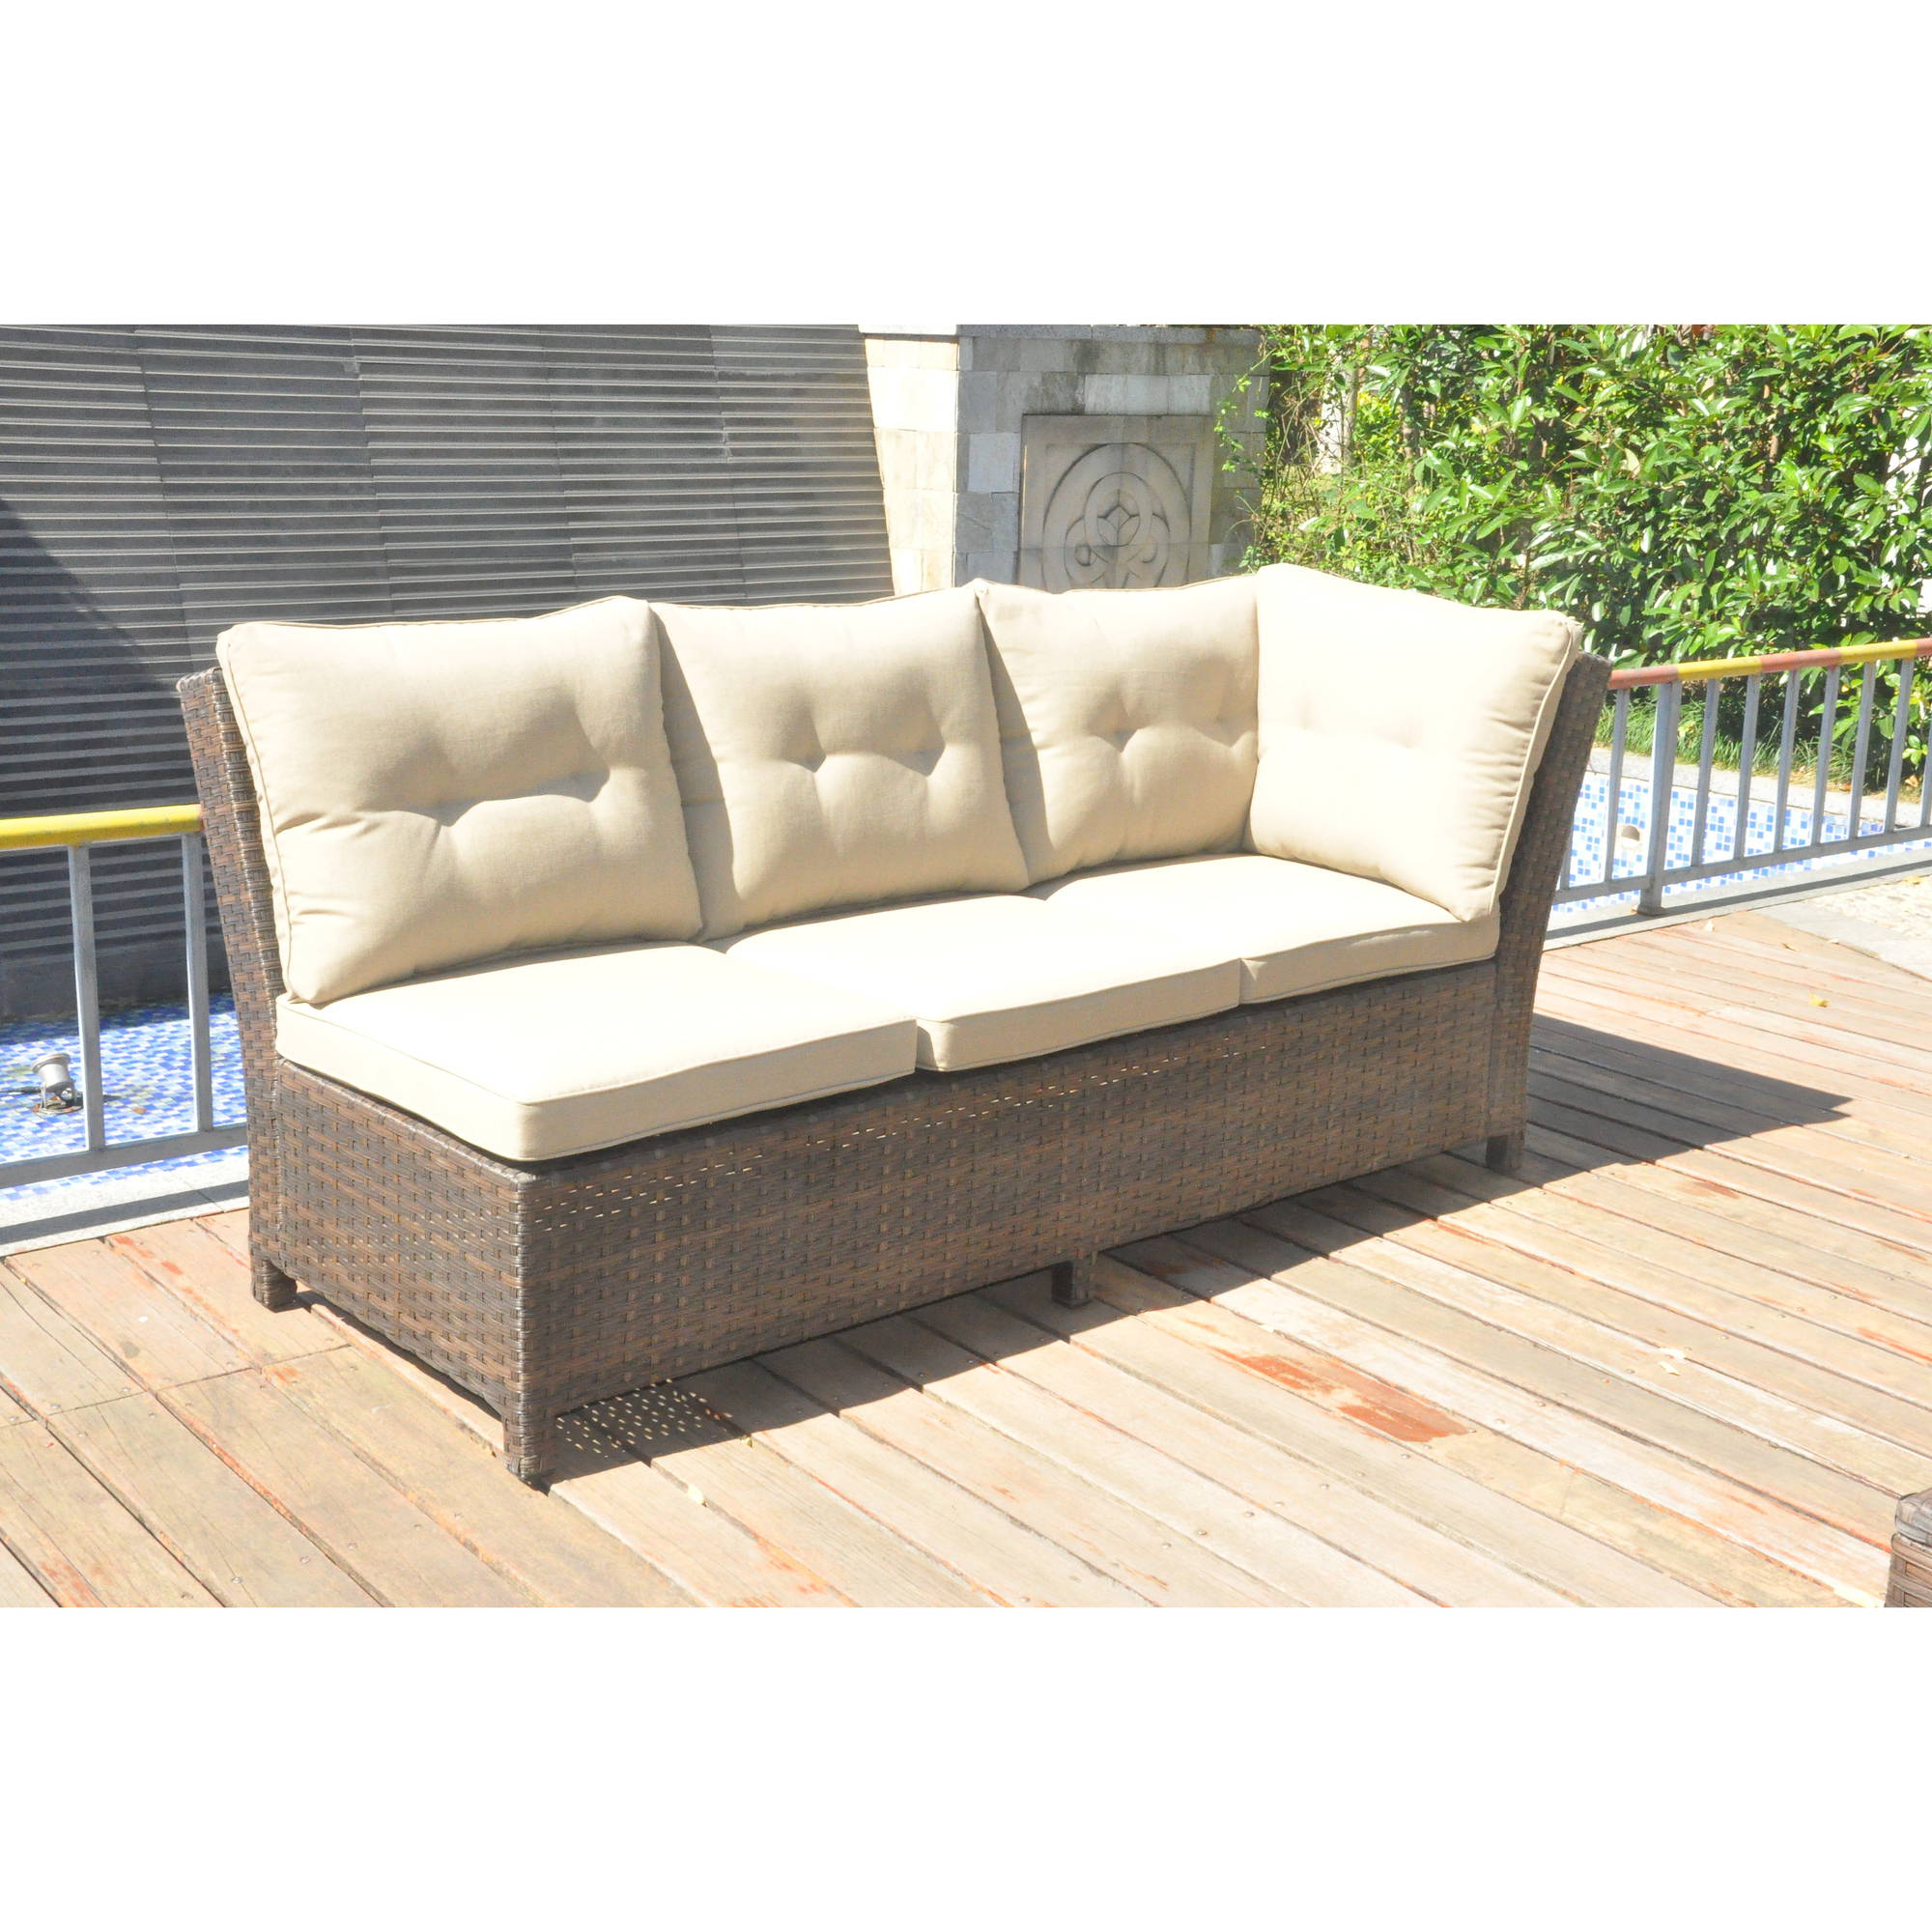 Better Homes and Gardens Baytown 5-Piece Woven Sectional Sofa Set, Seats 5 - image 4 of 6